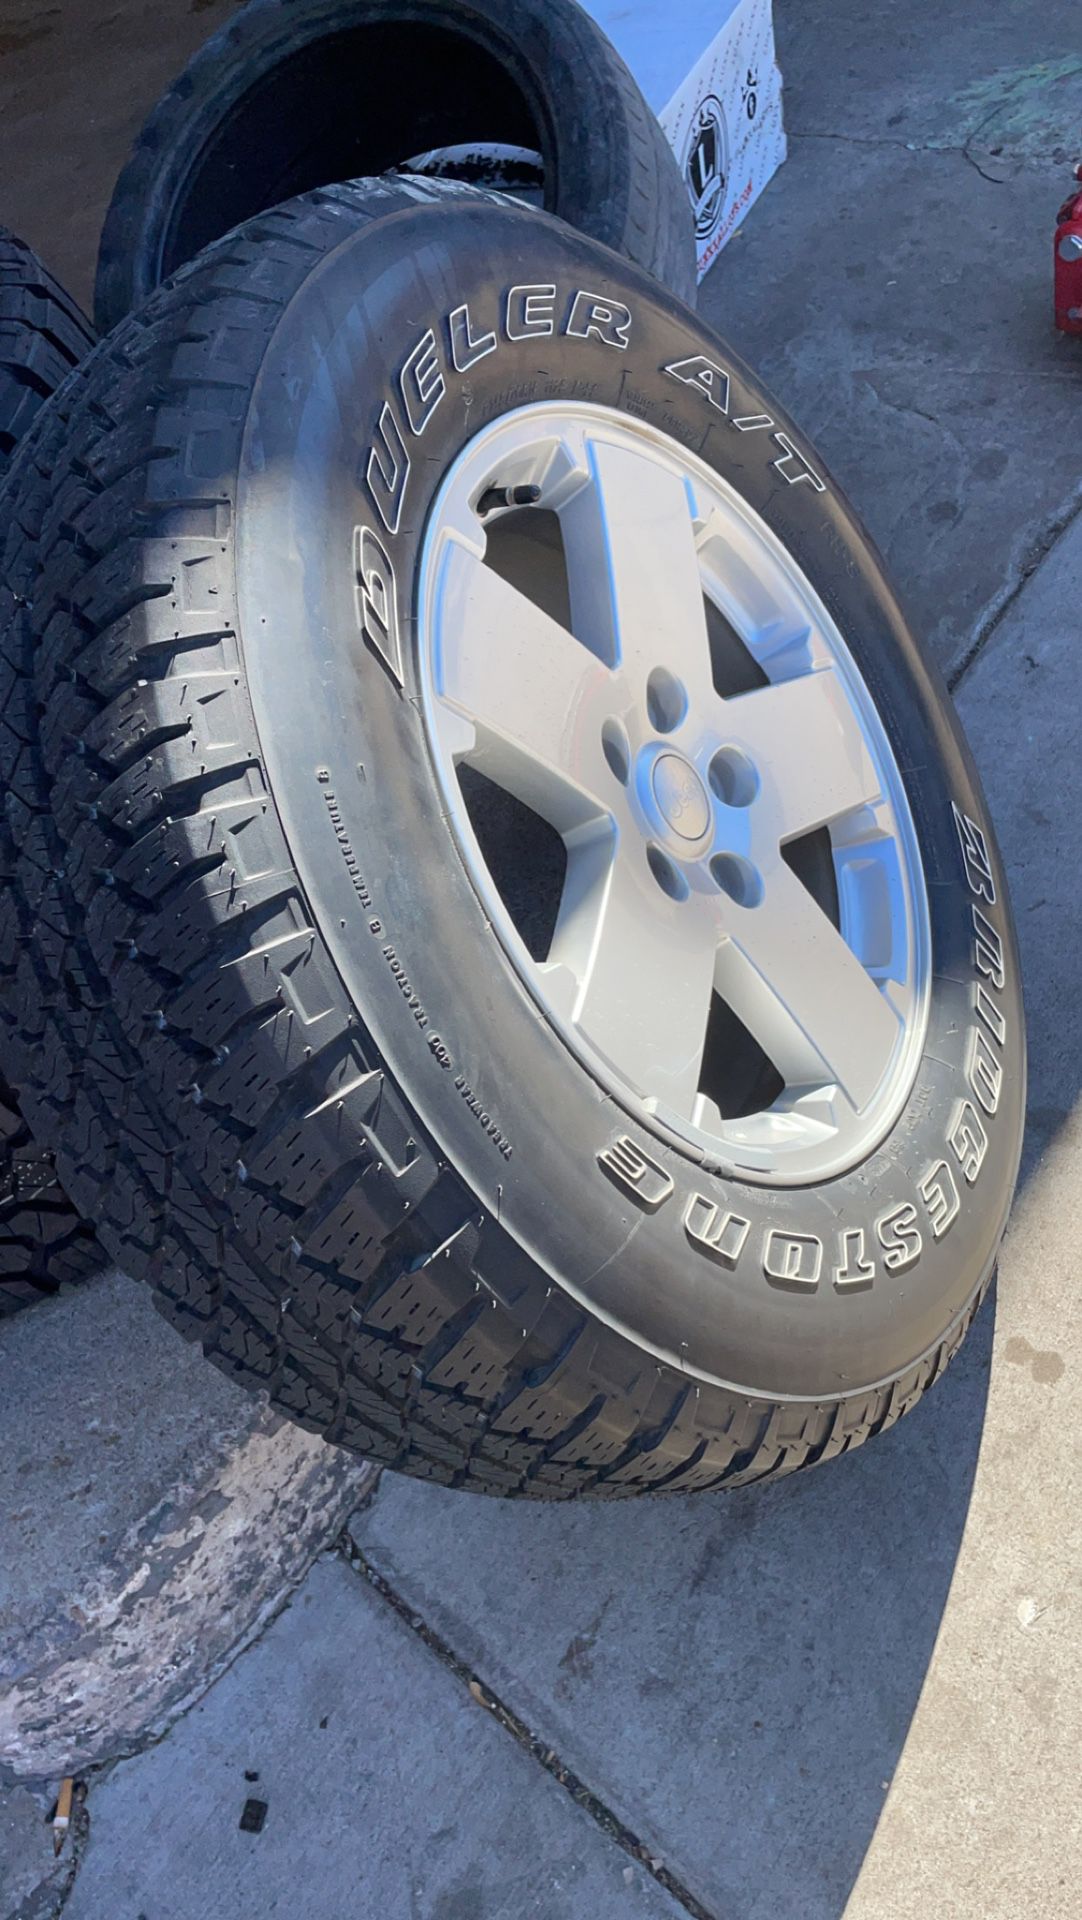 For Sale 5 OEM Jeep Wrangler Wheels 1 With New Tire And Set Of All Lug Nuts Located In Pueblo 700 OBO Will Deliver For Full Price 